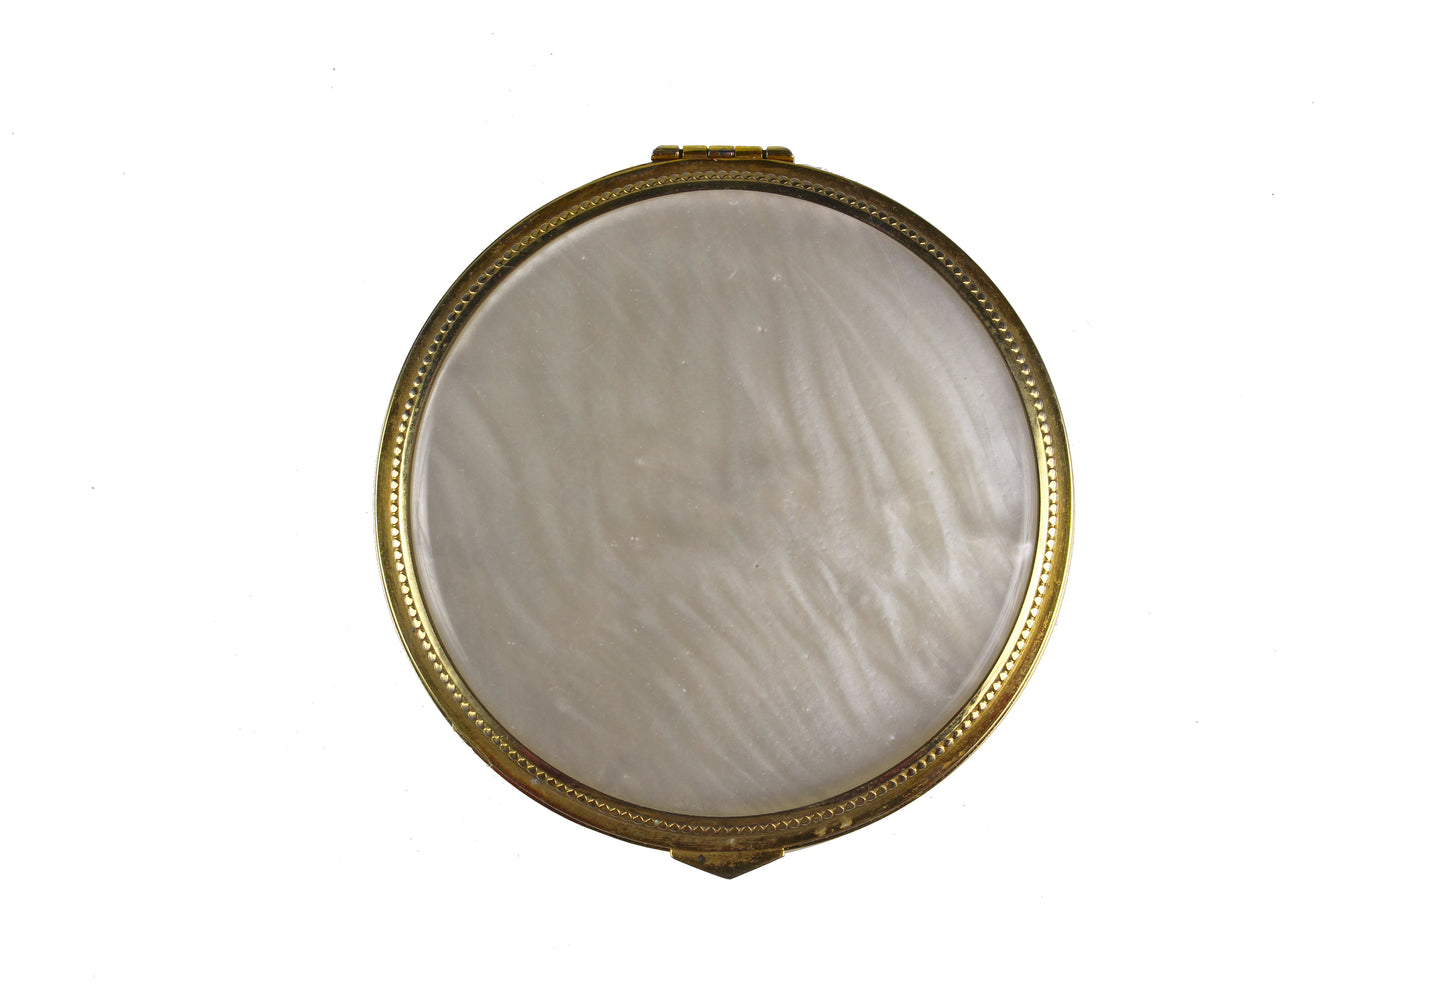 Powder compact case mother of pearl